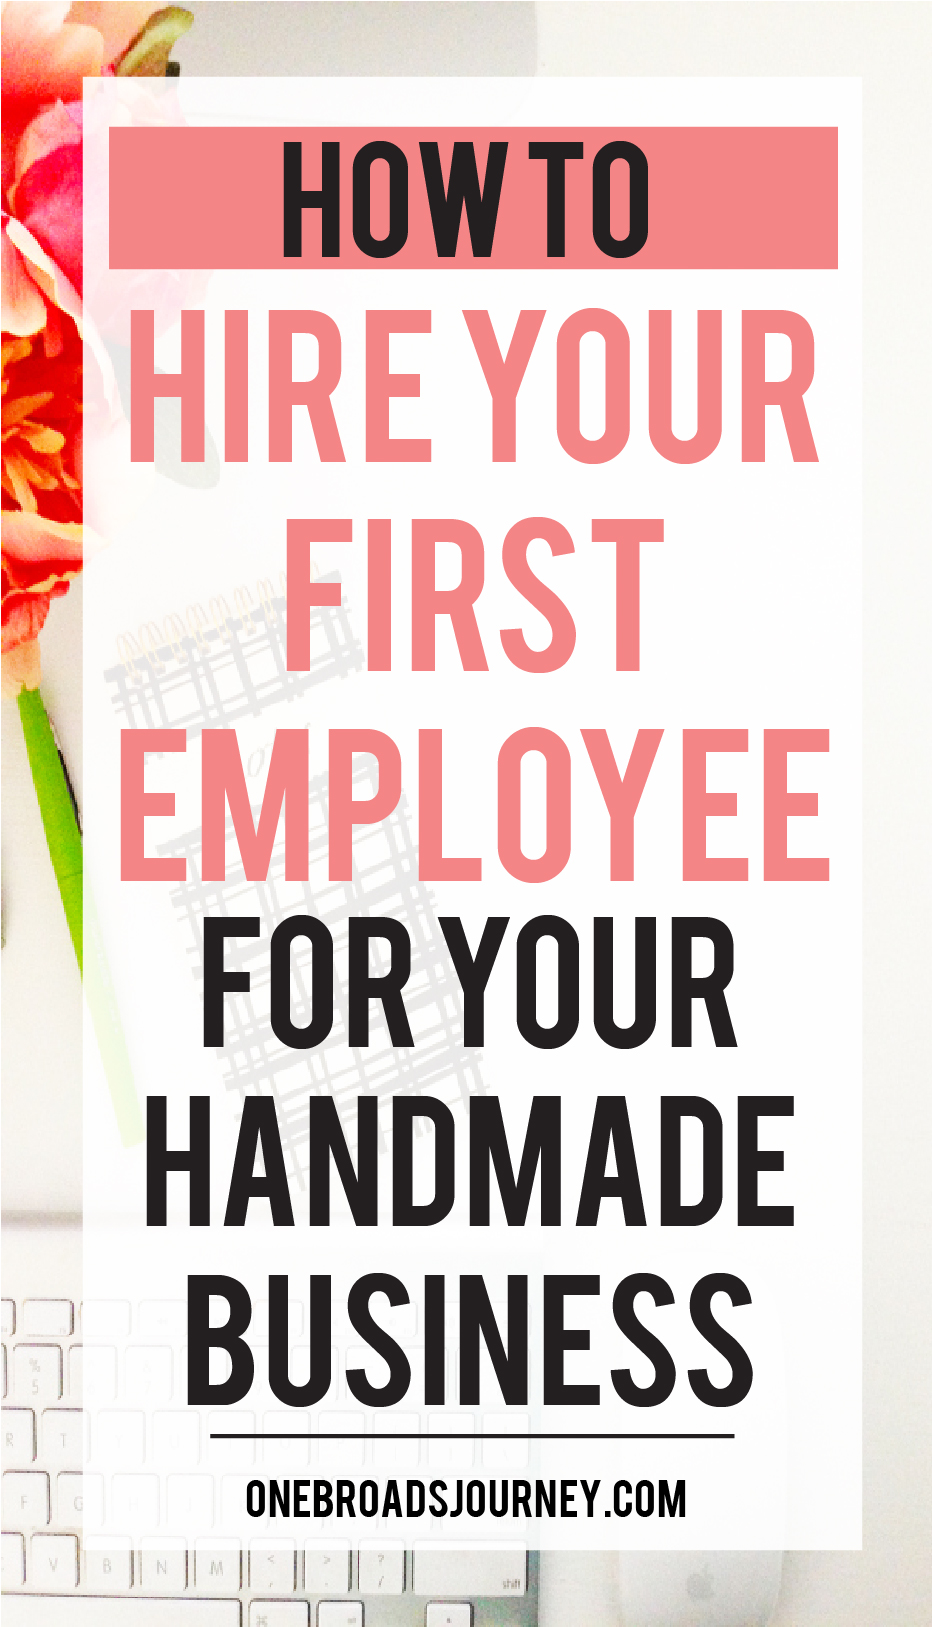 How to hire your first employee for your handmade business